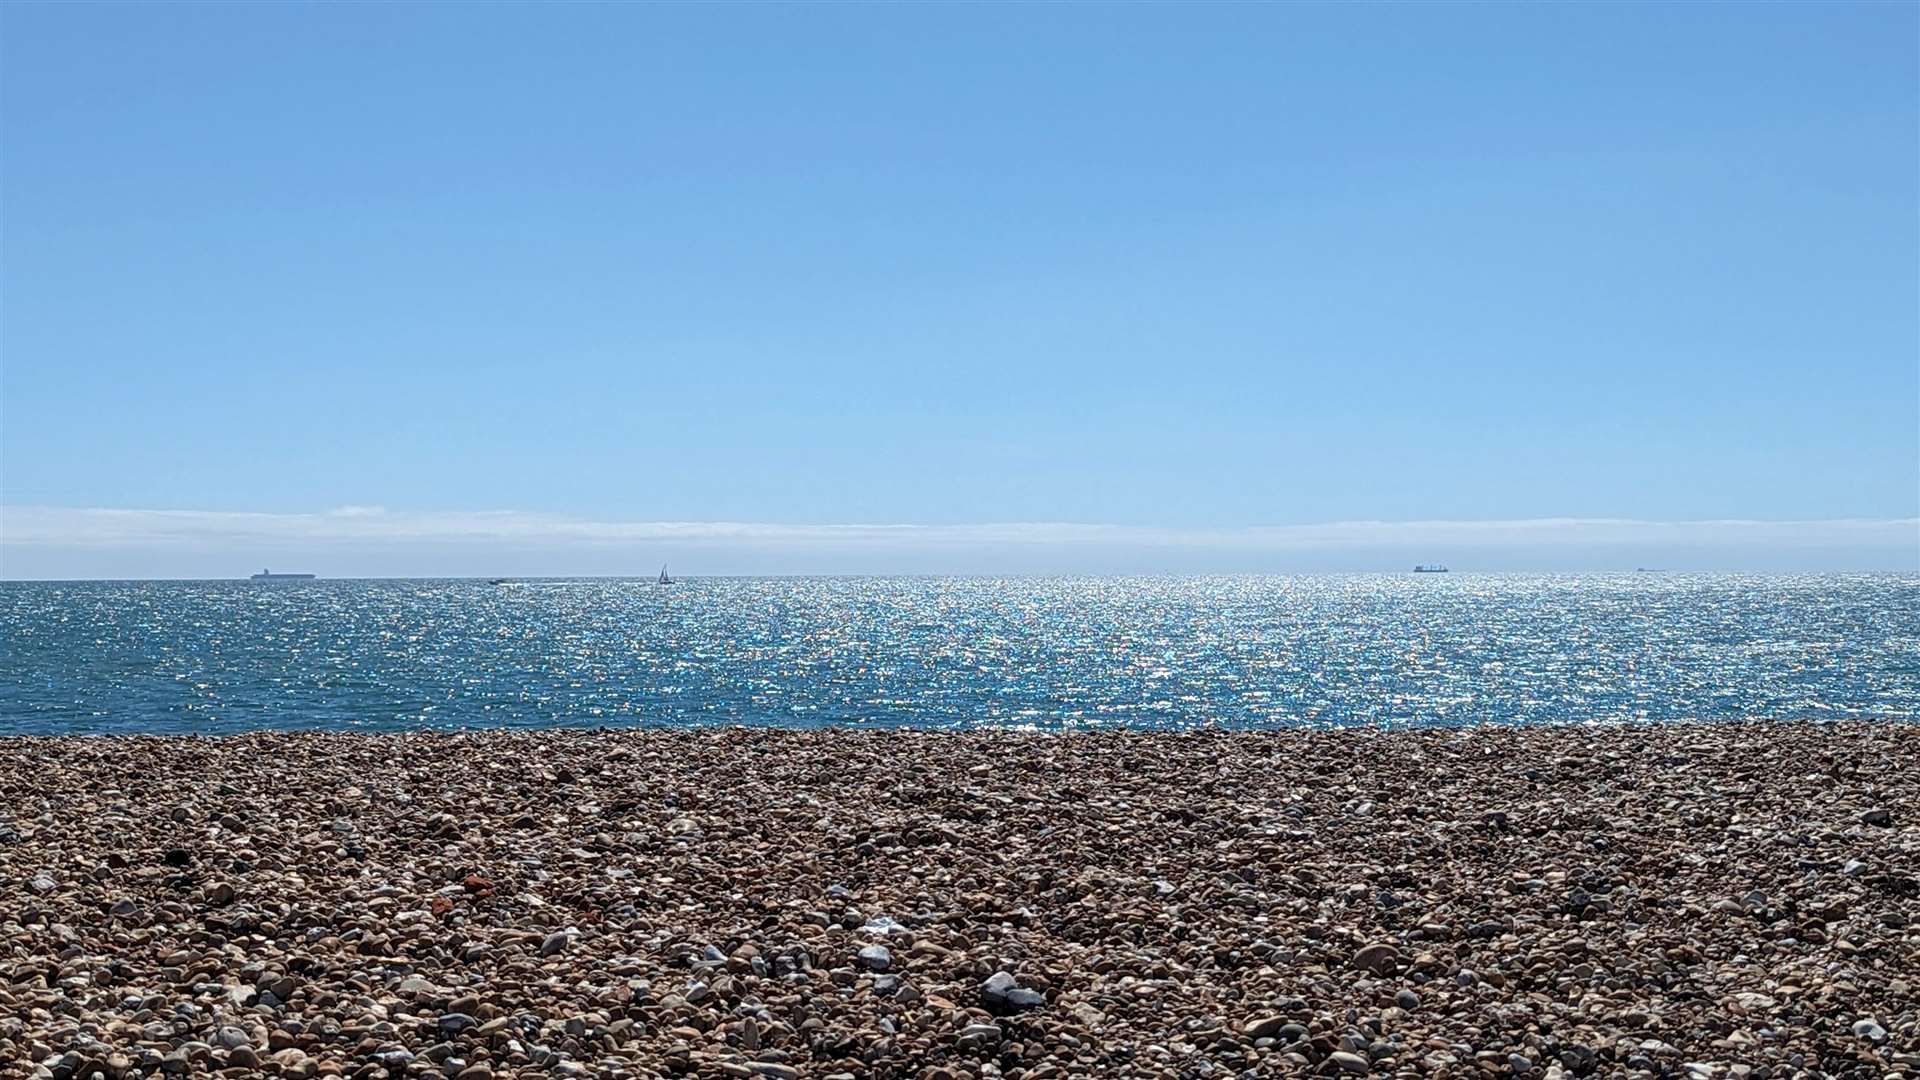 The waters of the English Channel shimmer beyond the shingle